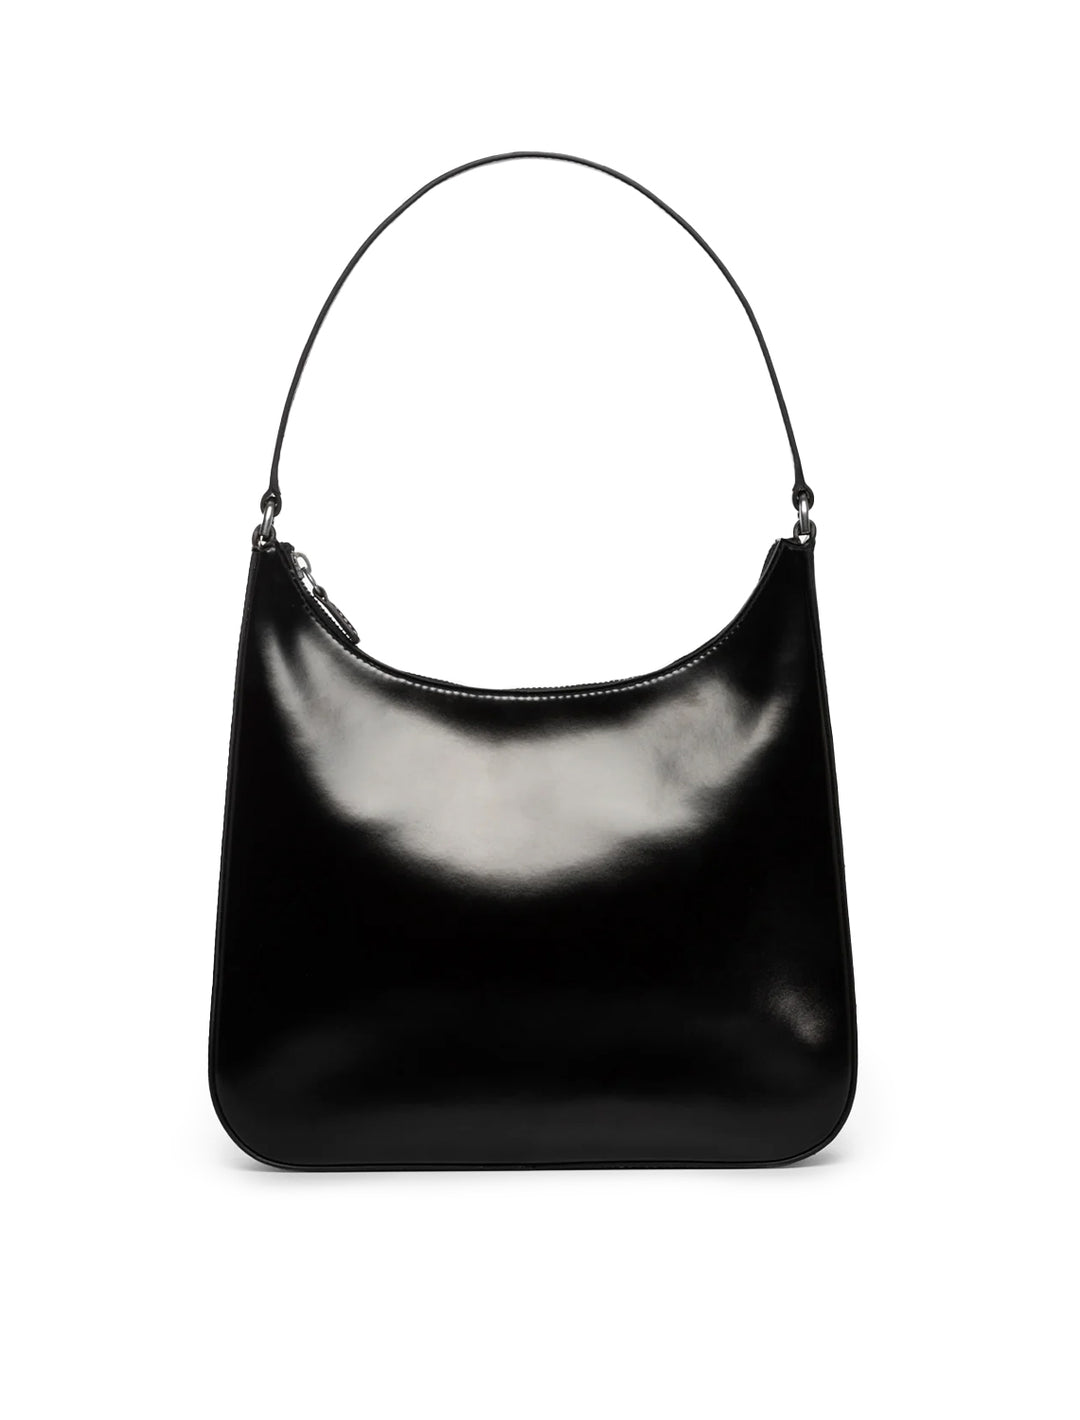 Front view of STAUD's alec bag in black.